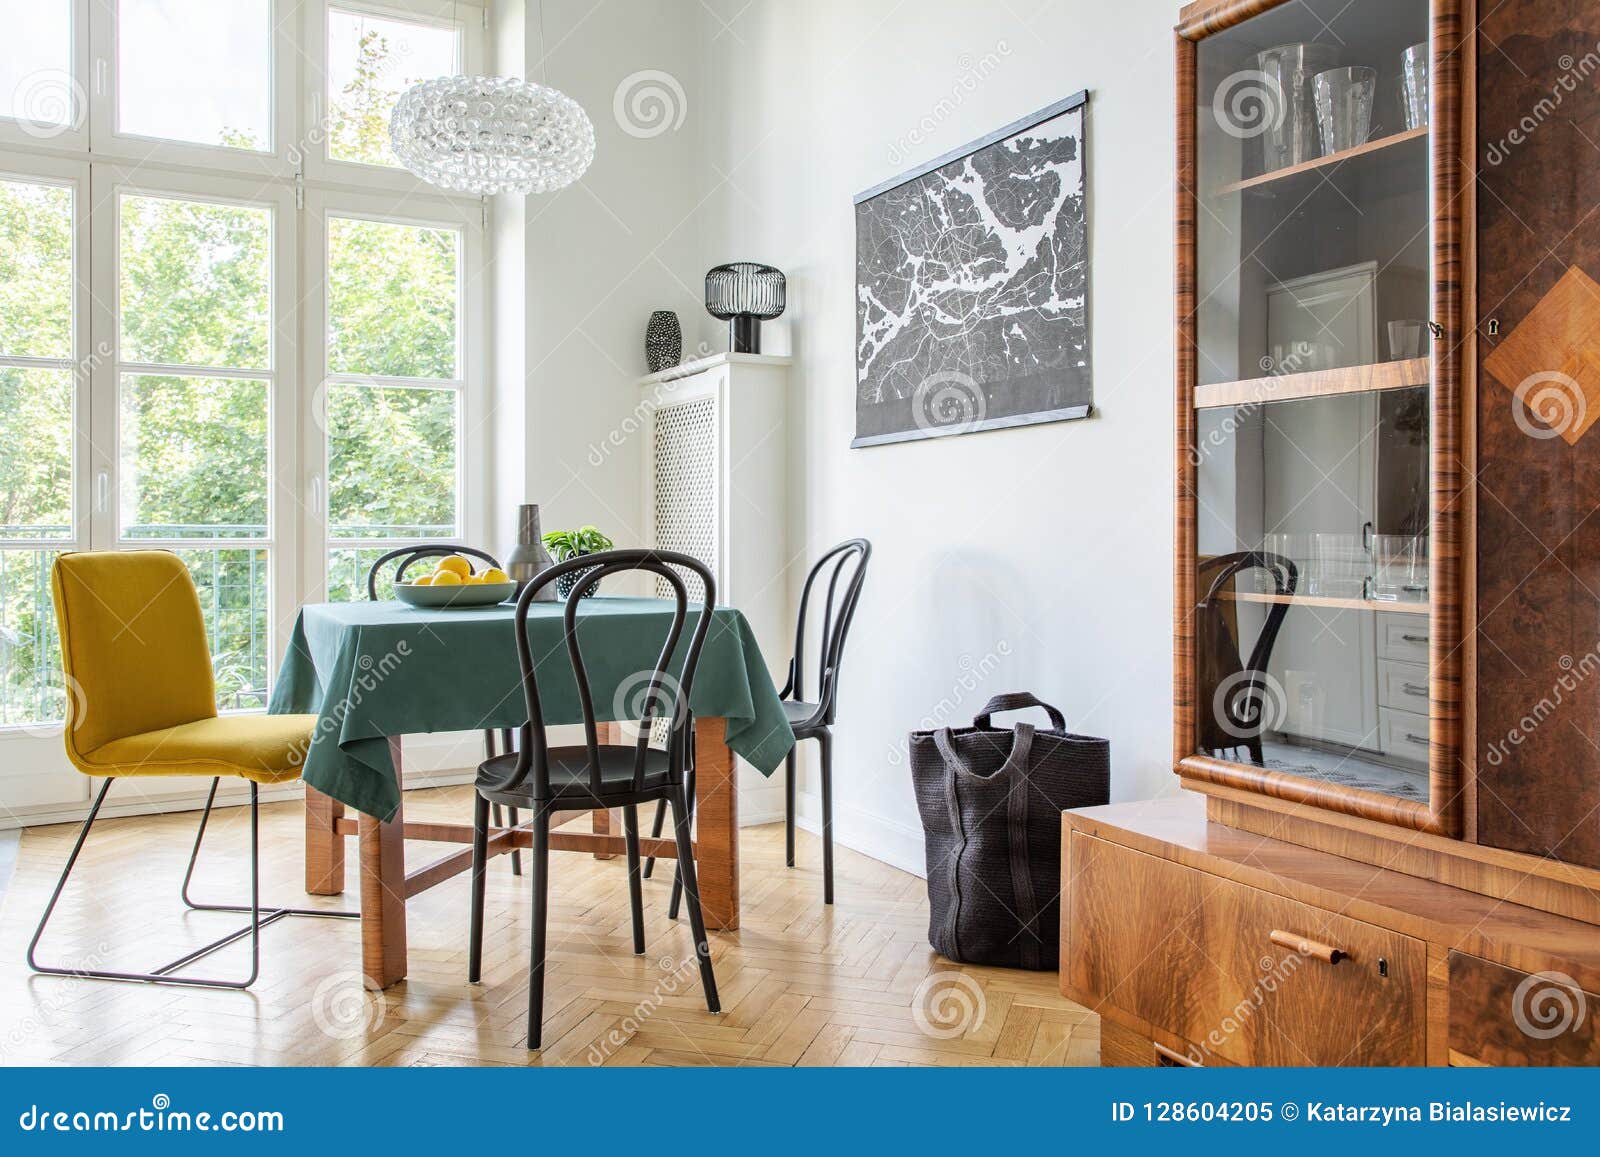 Engaging retro kitchen table chairs Retro Dining Room Interior With A Table Chairs And Cupboard In Tenement Stock Image Of Home Parquet 128604205